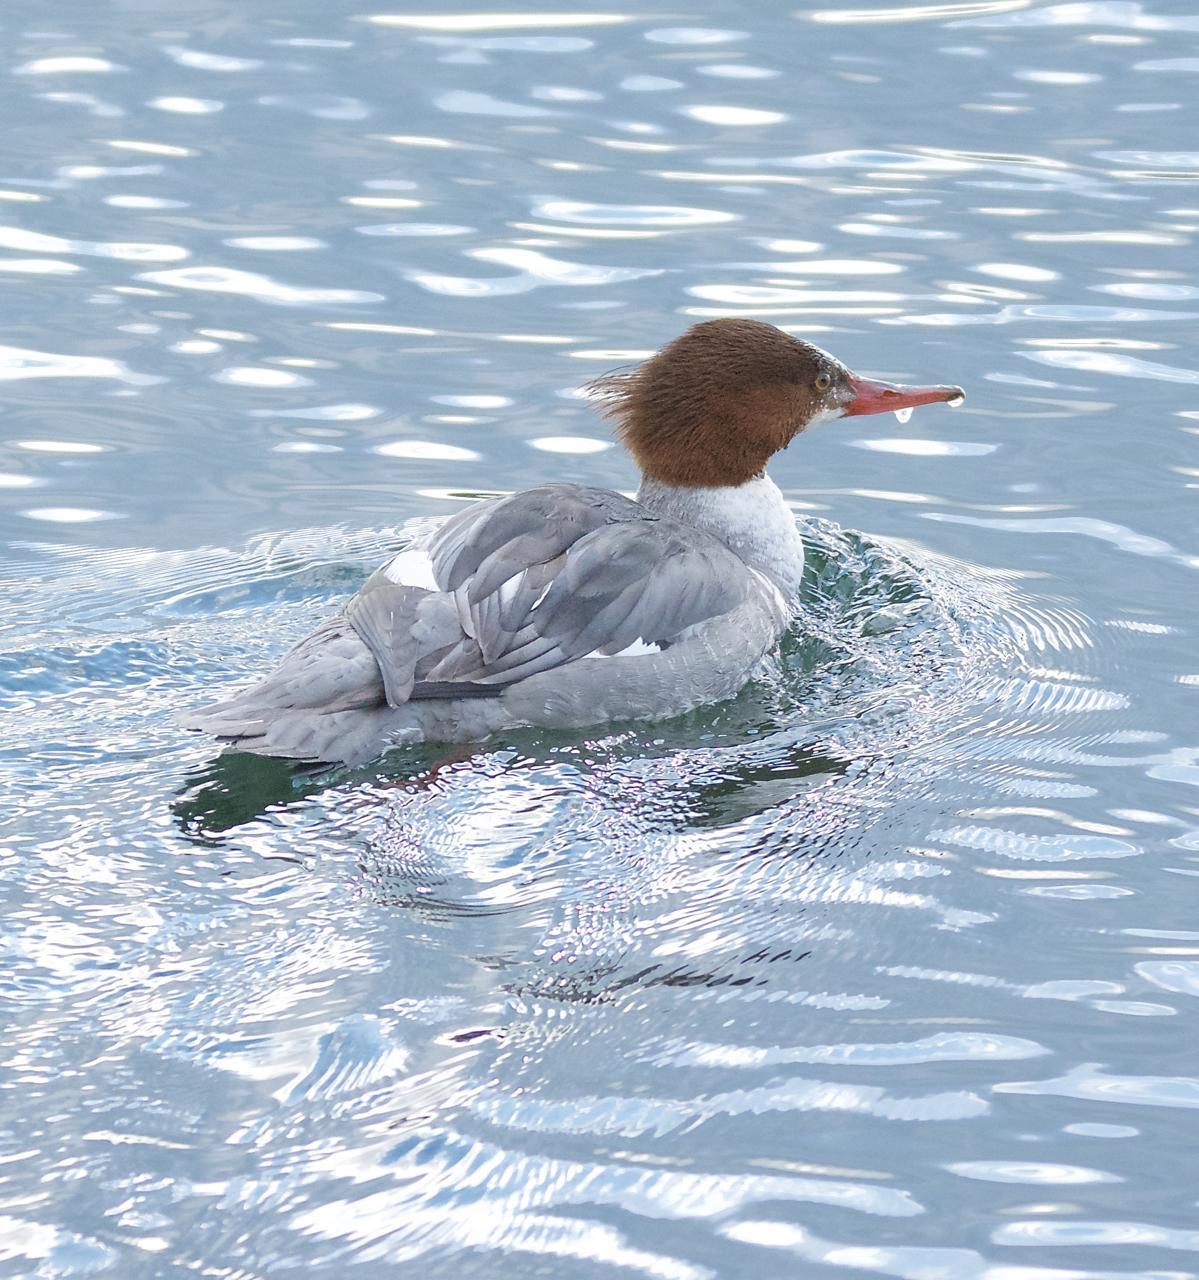 Common Merganser (North American) Photo by Brian Avent